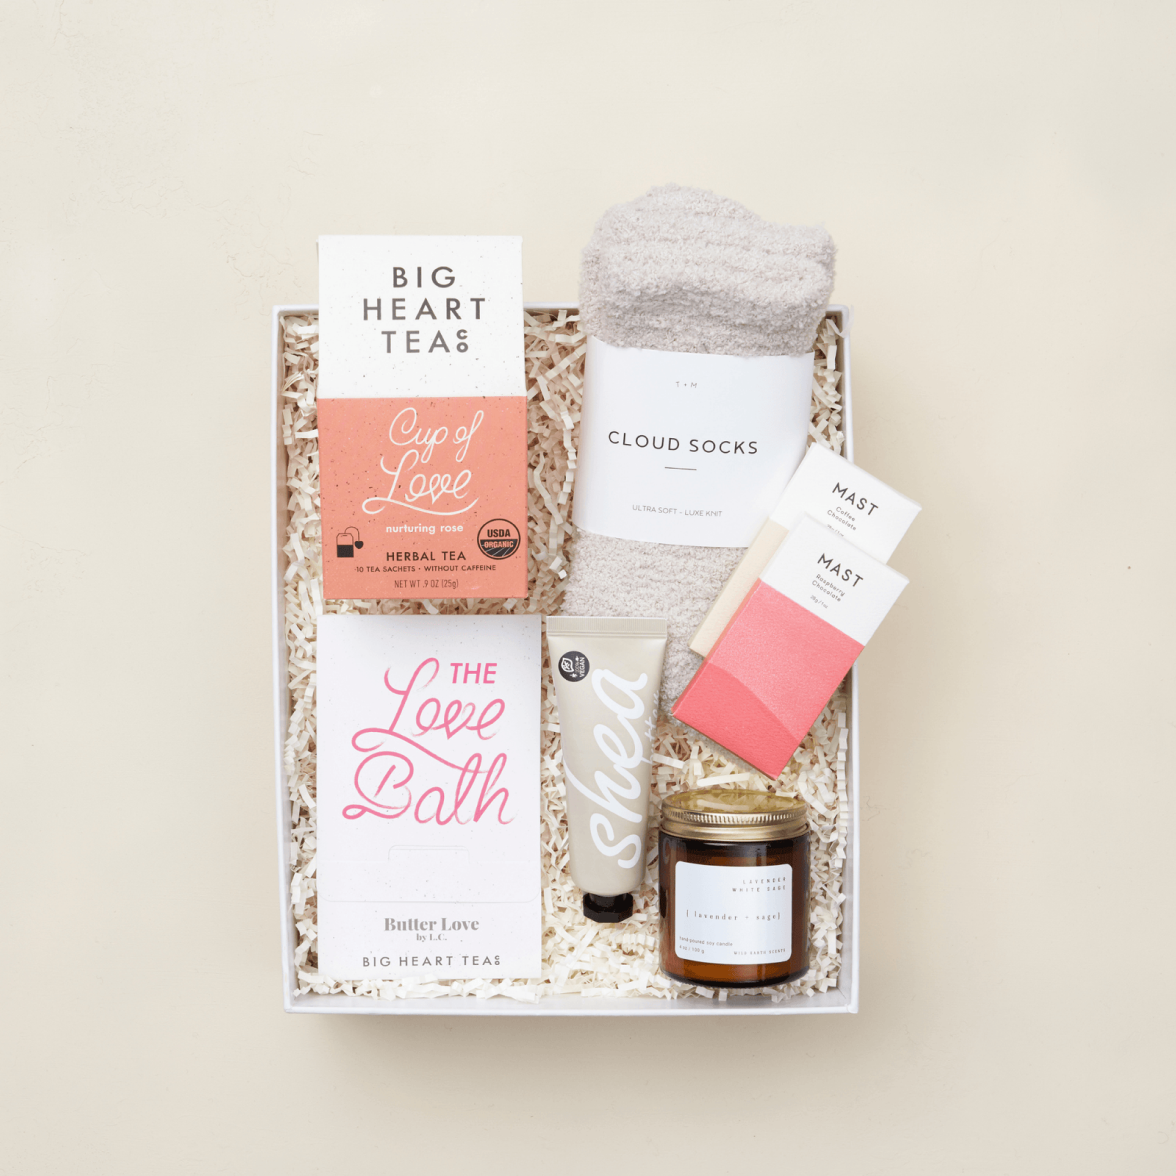 Gift boxes for Everyone, delivered to your door - Pick a Box